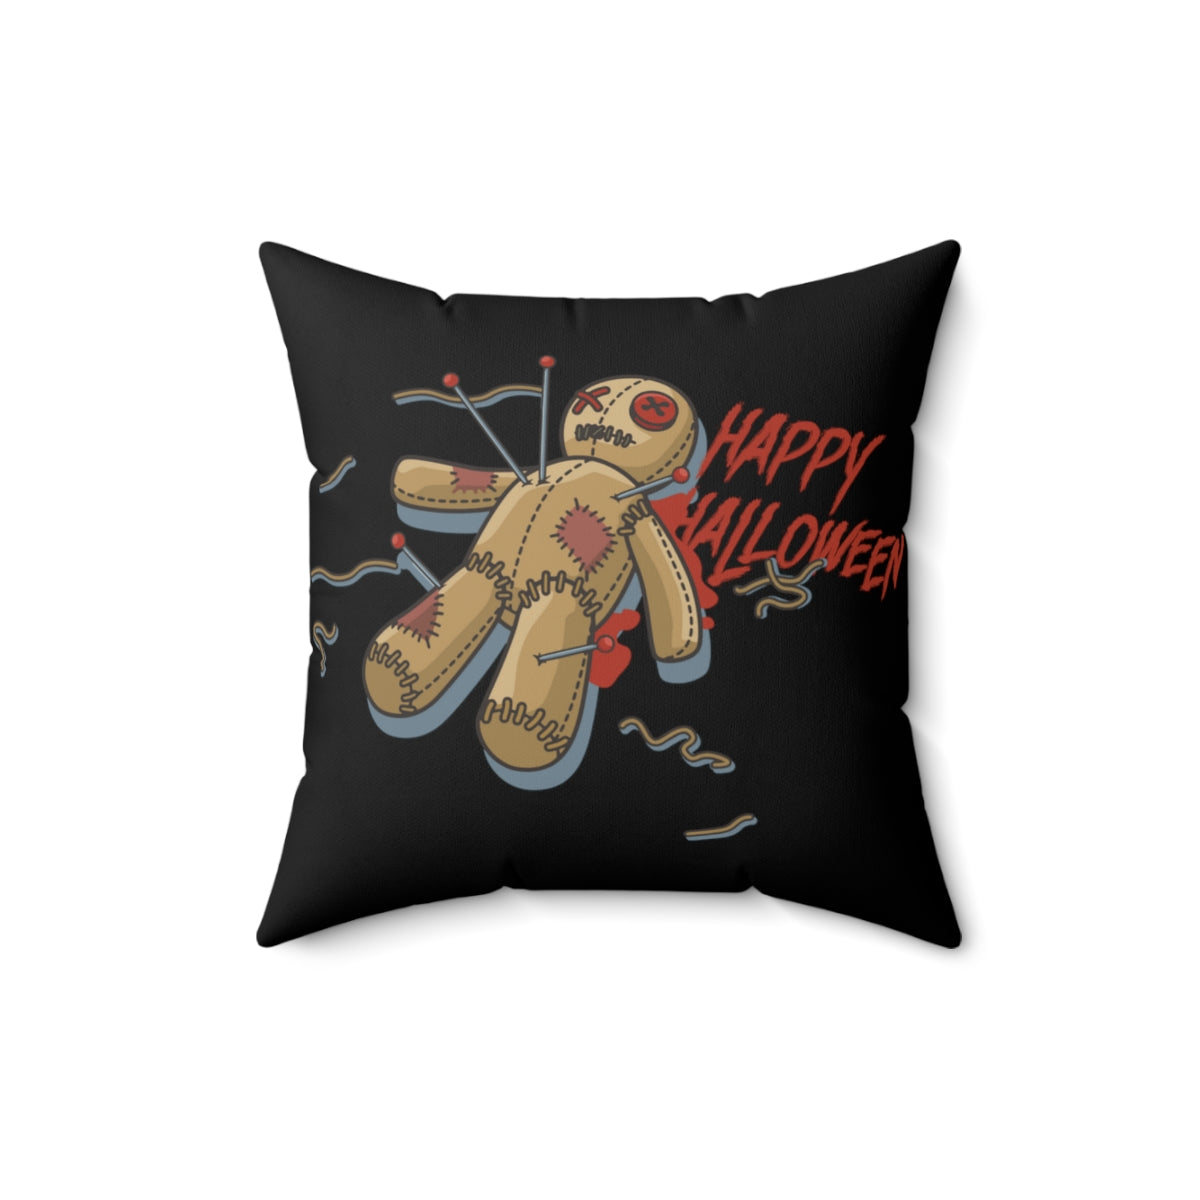 Happy Halloween Goth Fall Autumn Throw Pillow Covers, Decorative Accent Couch Pillow, Spun Polyester Square